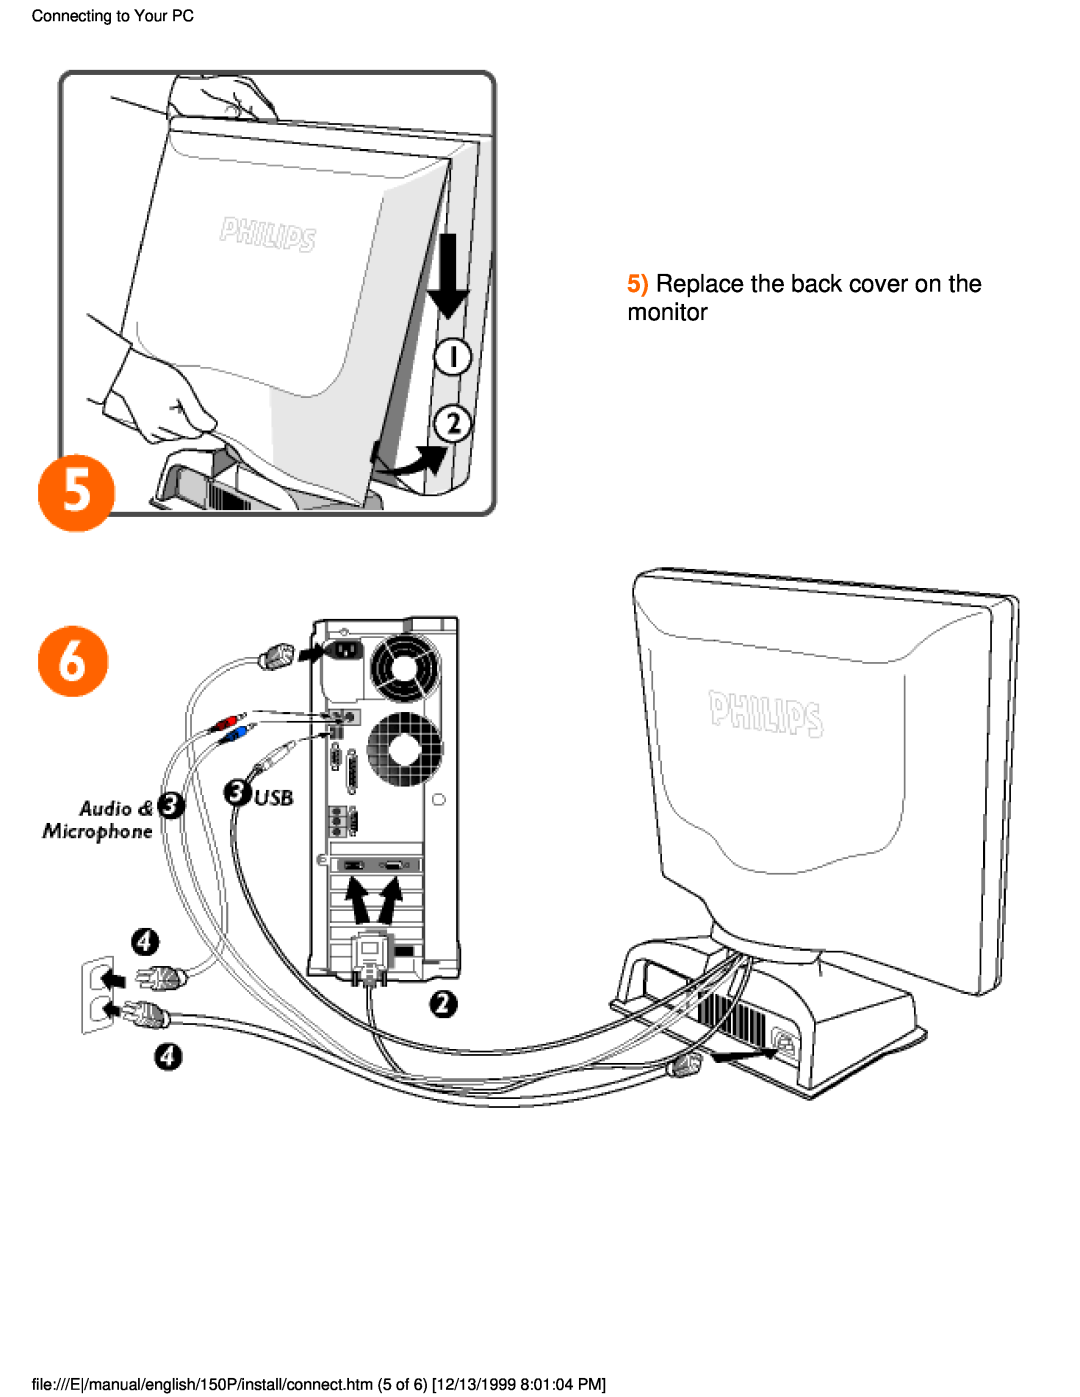 Philips 150P user manual Replace the back cover on the monitor, Connecting to Your PC 